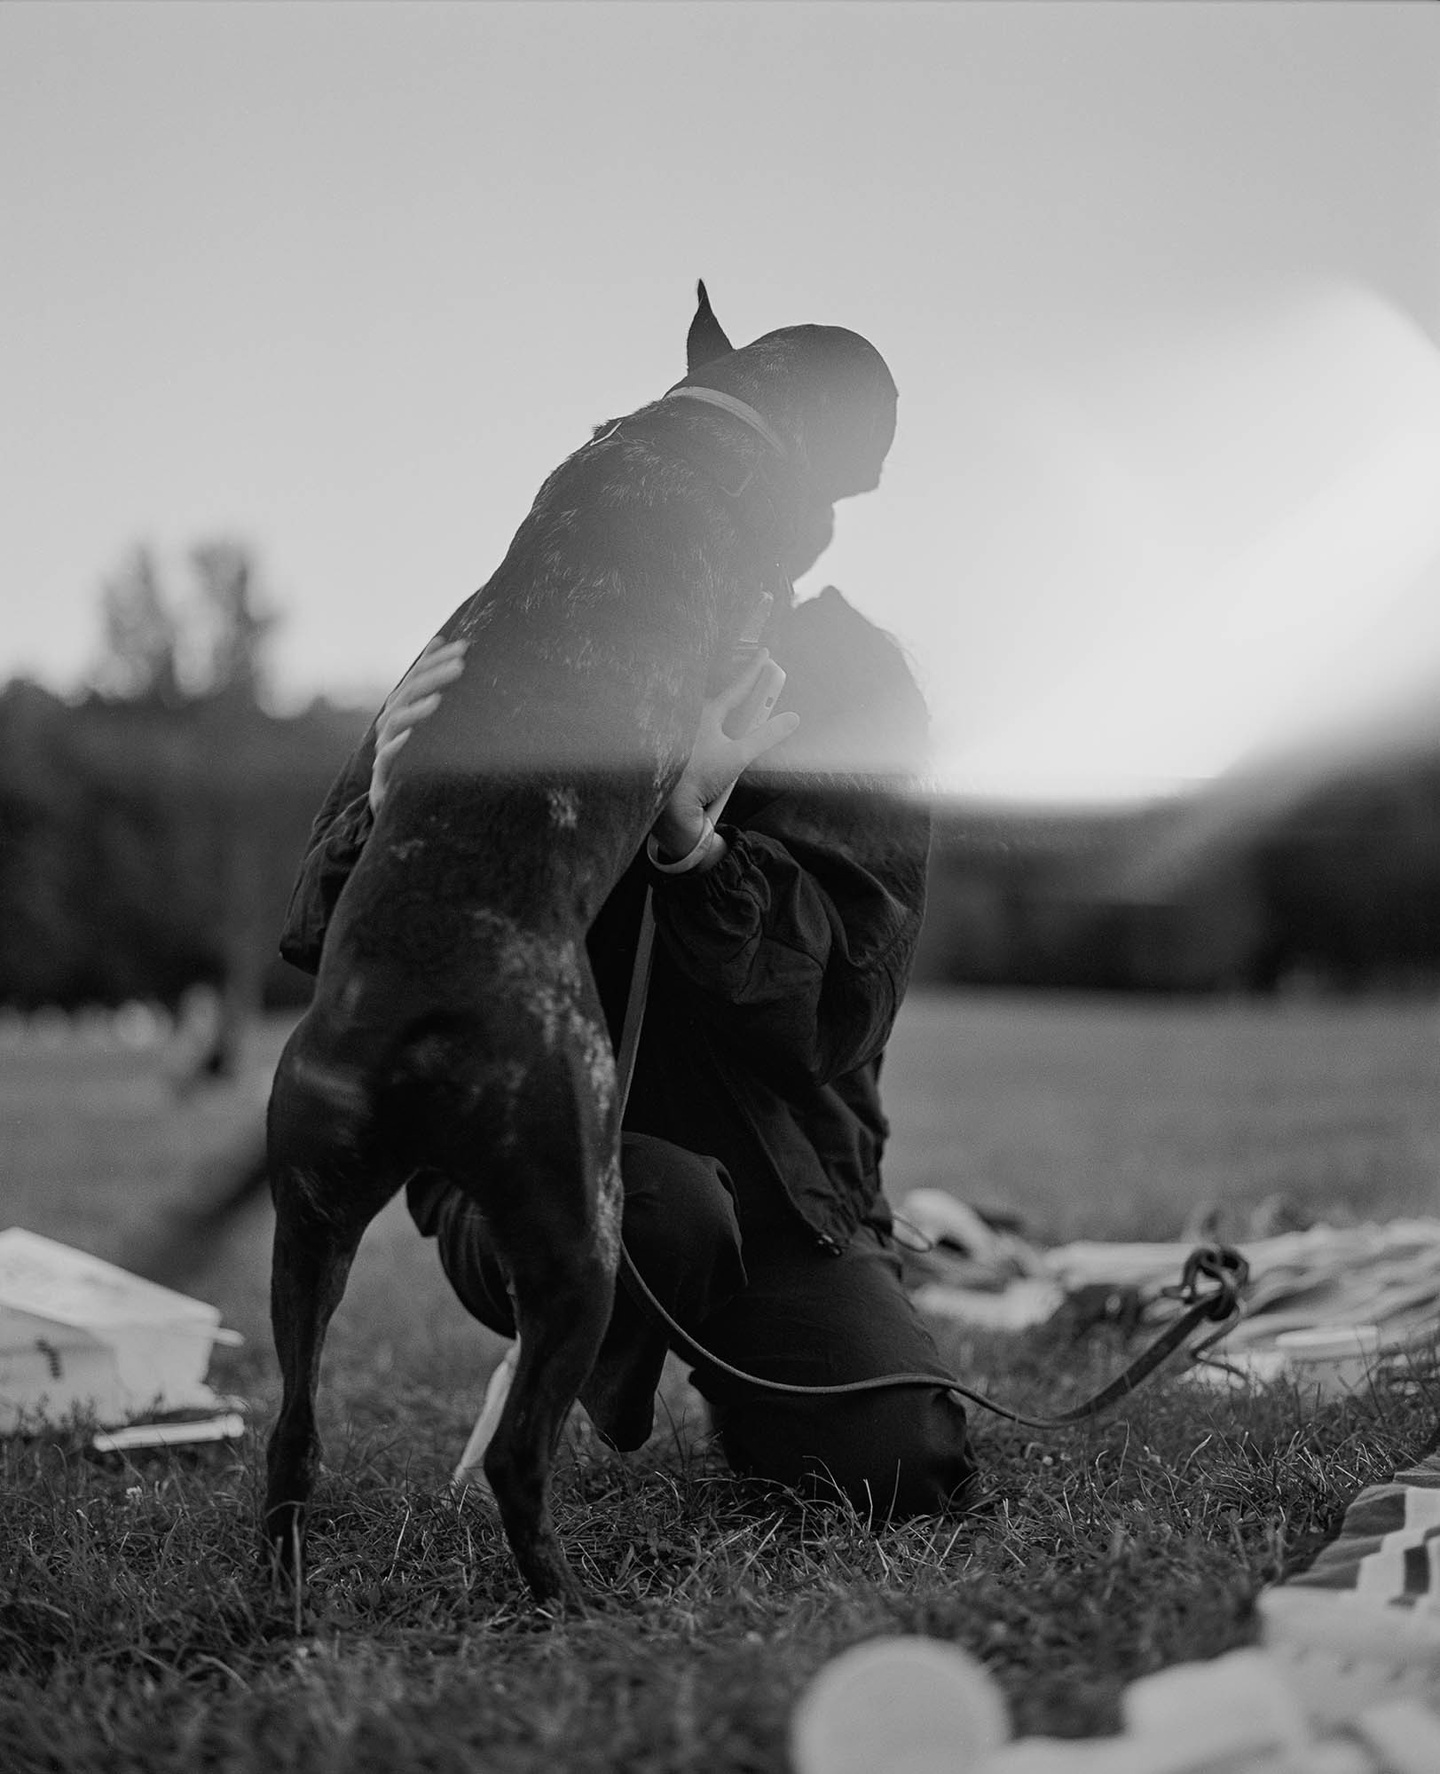 Black-and-white photo, someone obscured by sun glare, of a dog on its hind legs, greeting a person.